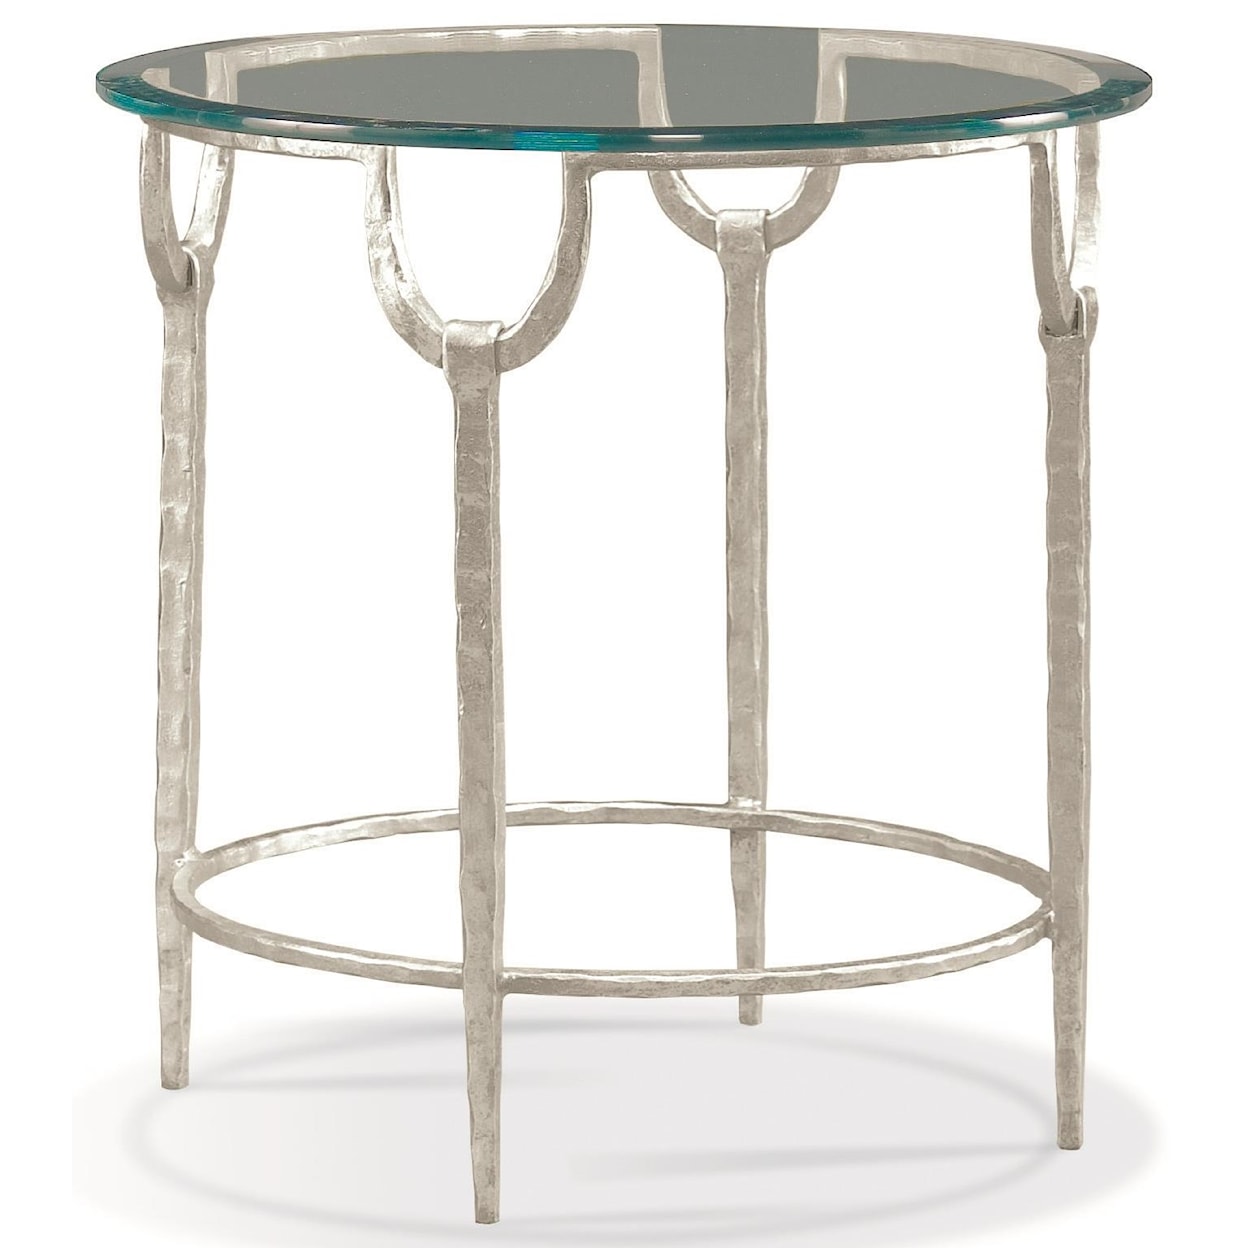 CTH Sherrill Occasional Masterpiece - Trifecta Round Lamp Table